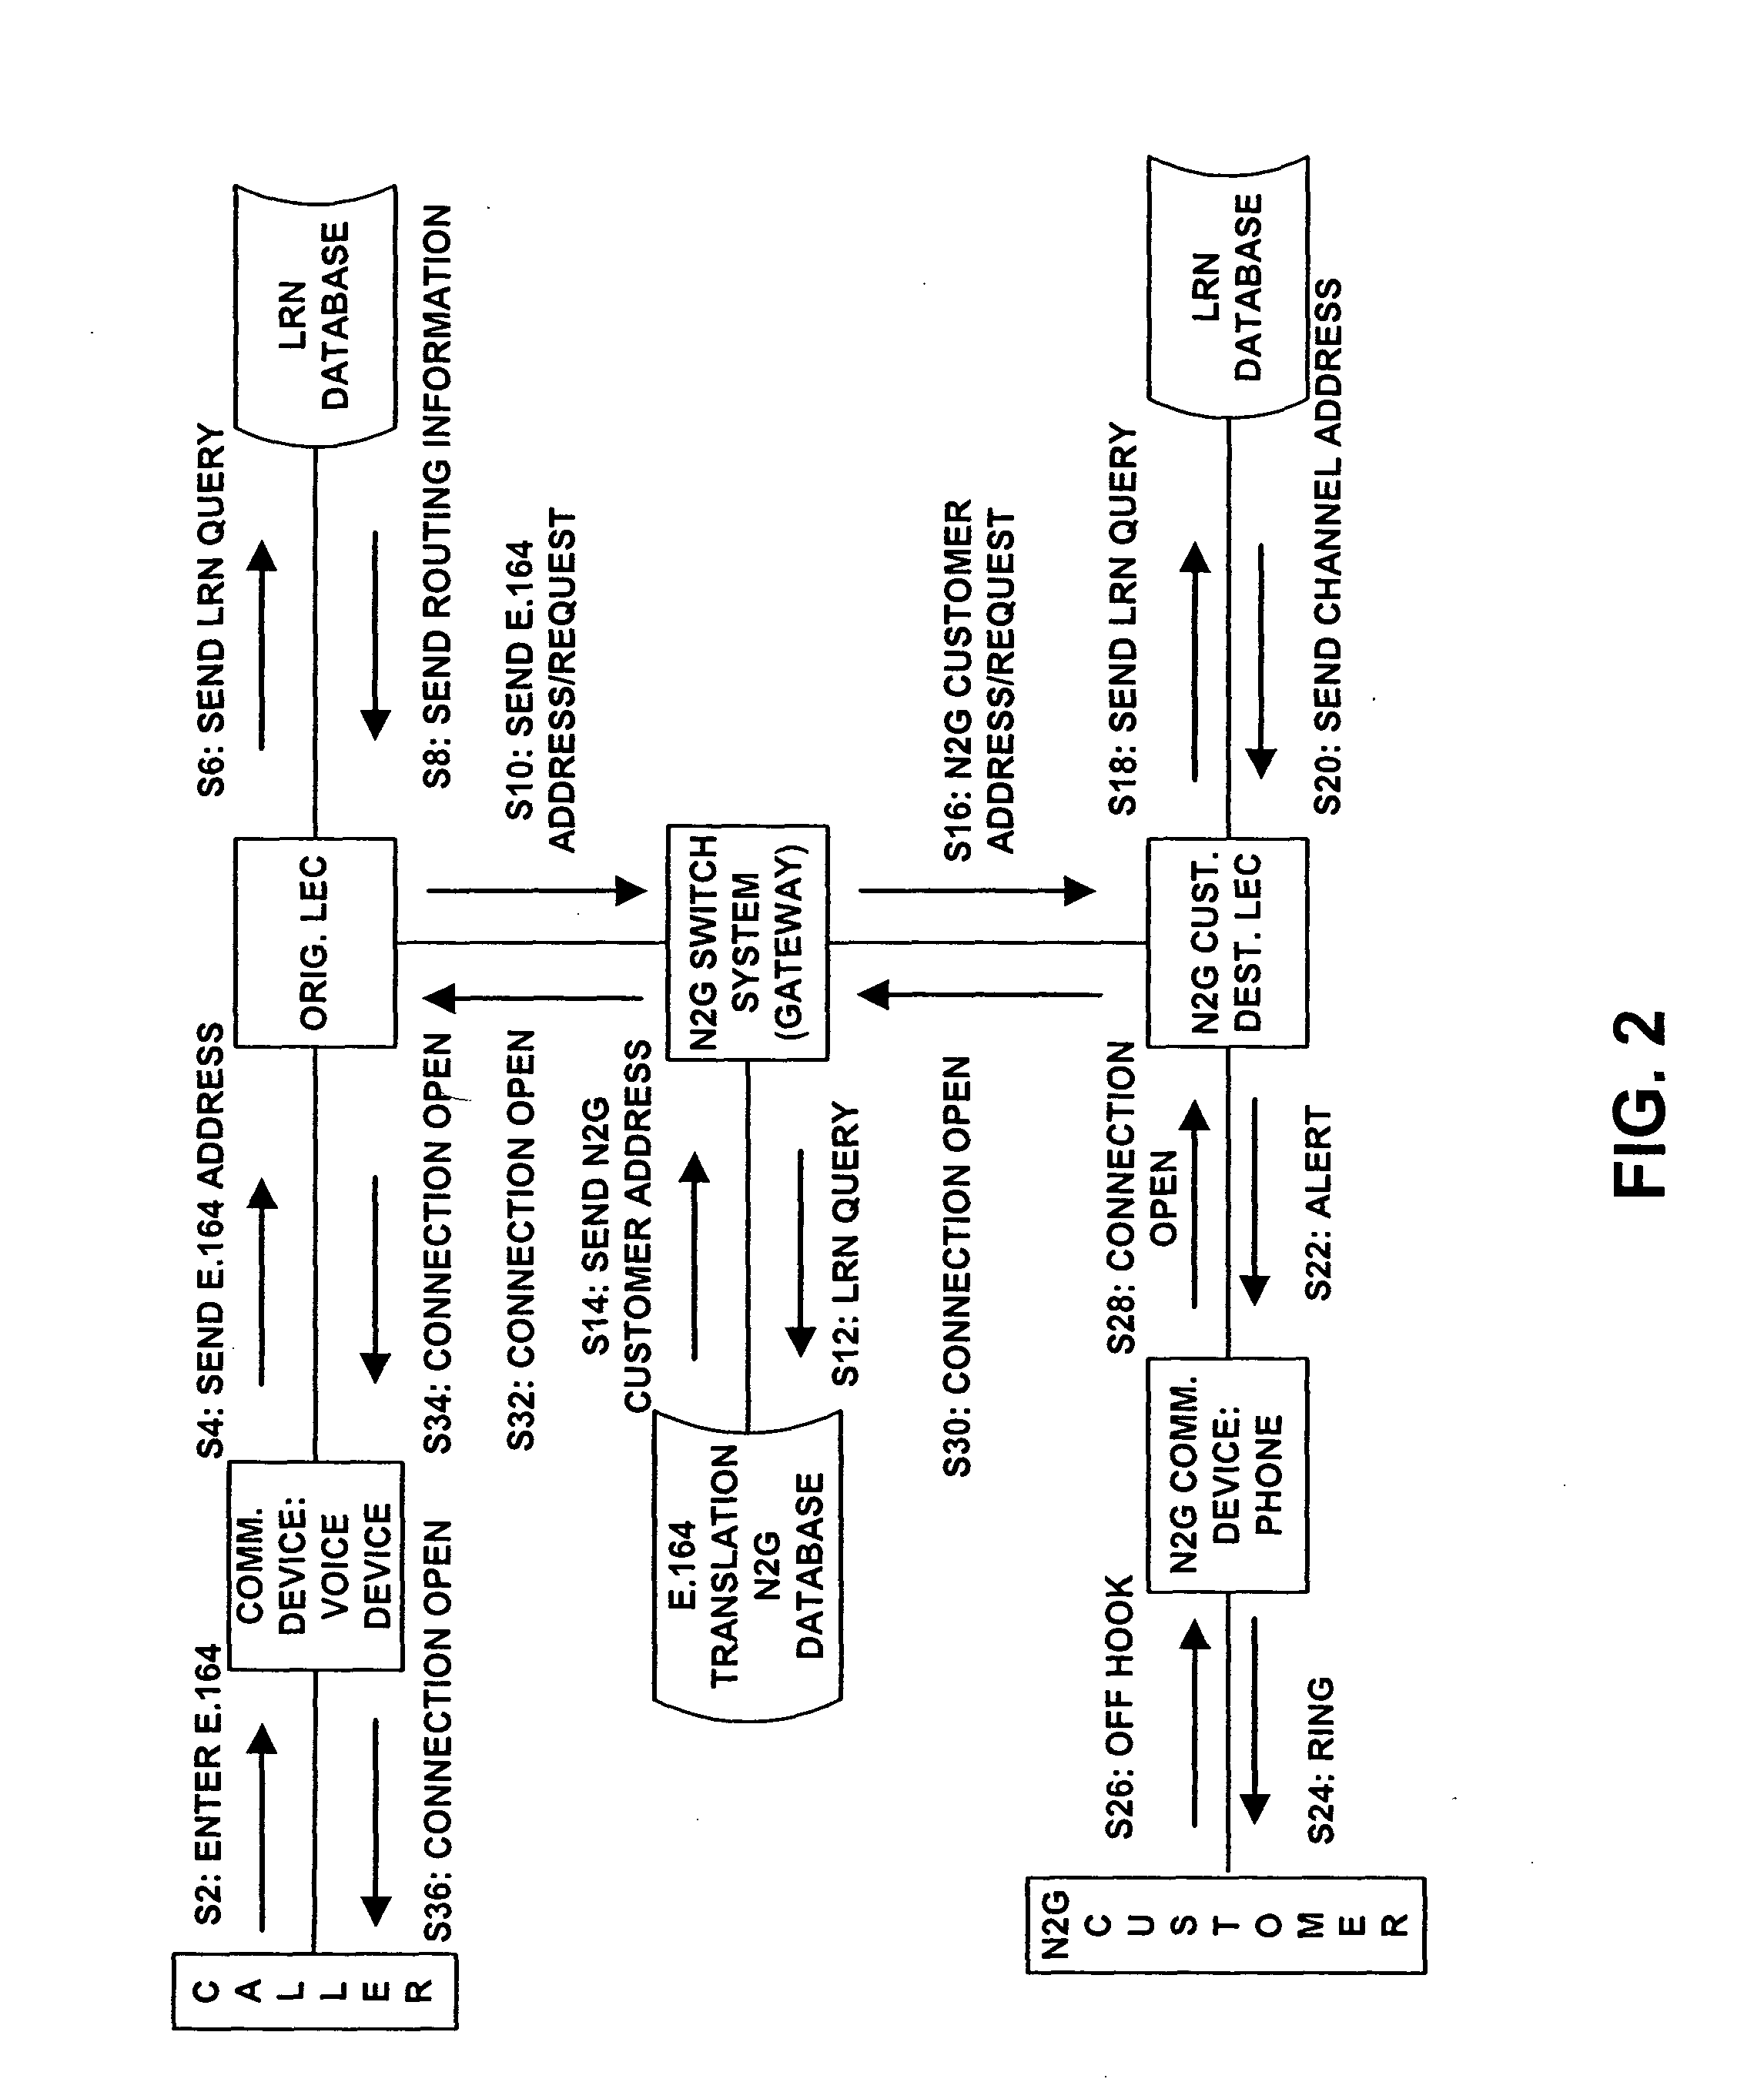 Local number provisioning system and method